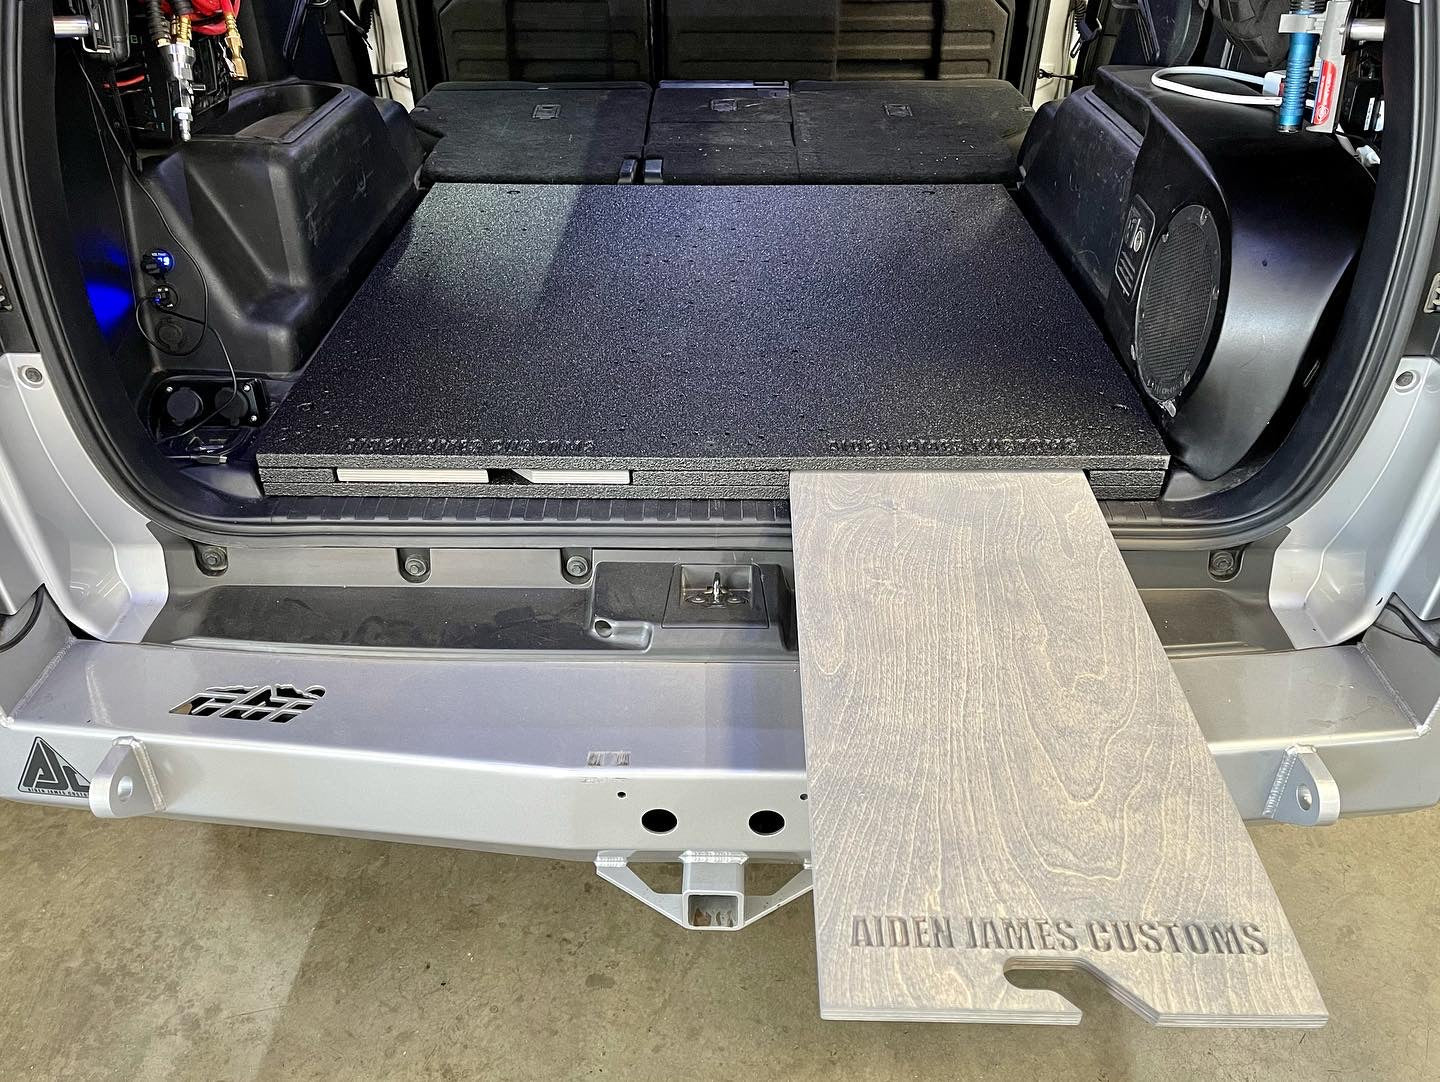 Aiden James Customs - Riser Kit with Twin Slide-Out Tables - Toyota 4Runner (2010+)